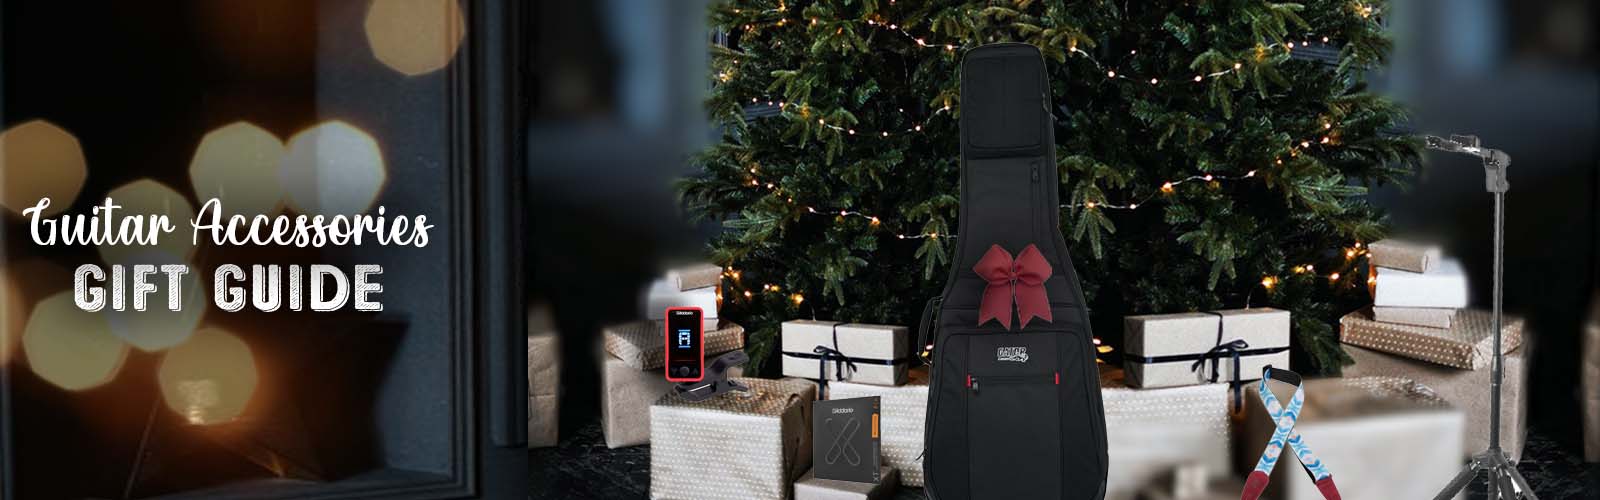 Guitar Accessories Gift Guide Banner